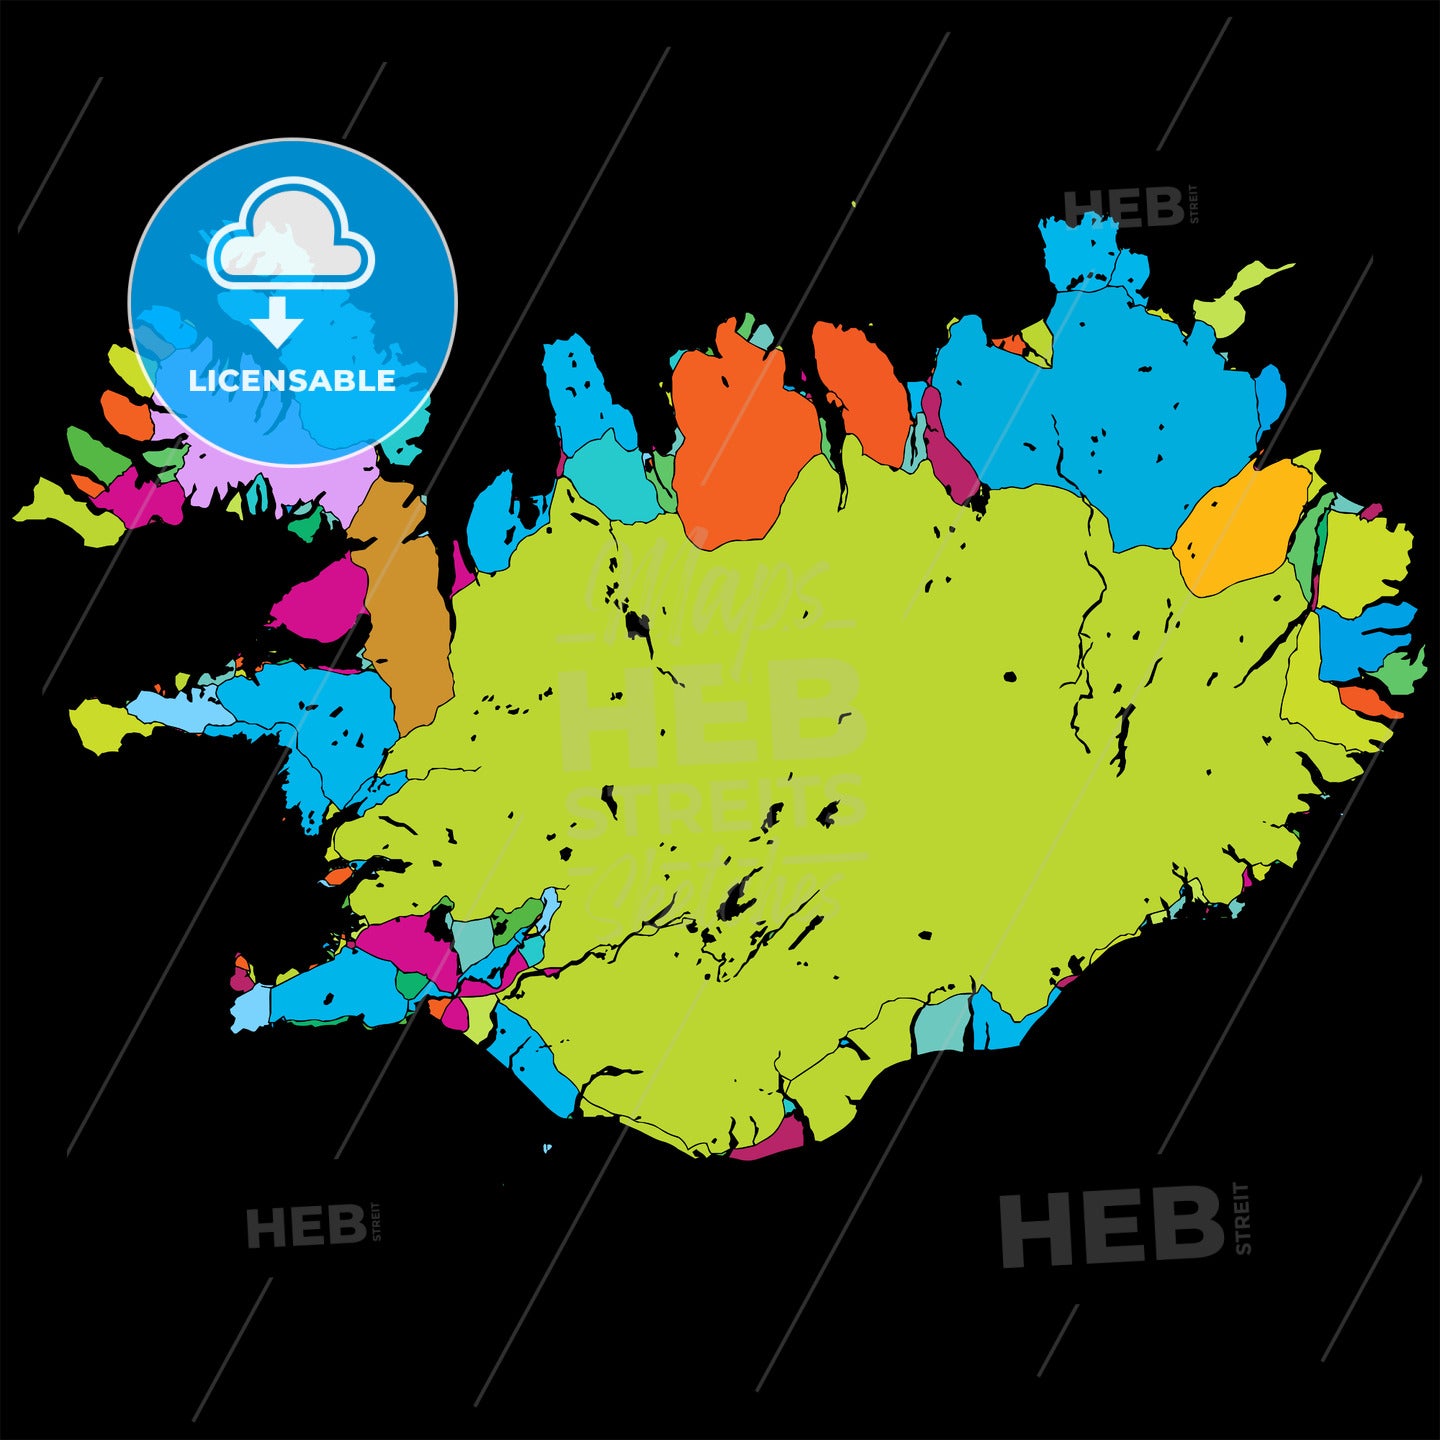 Iceland Island Colorful Vector Map on Black